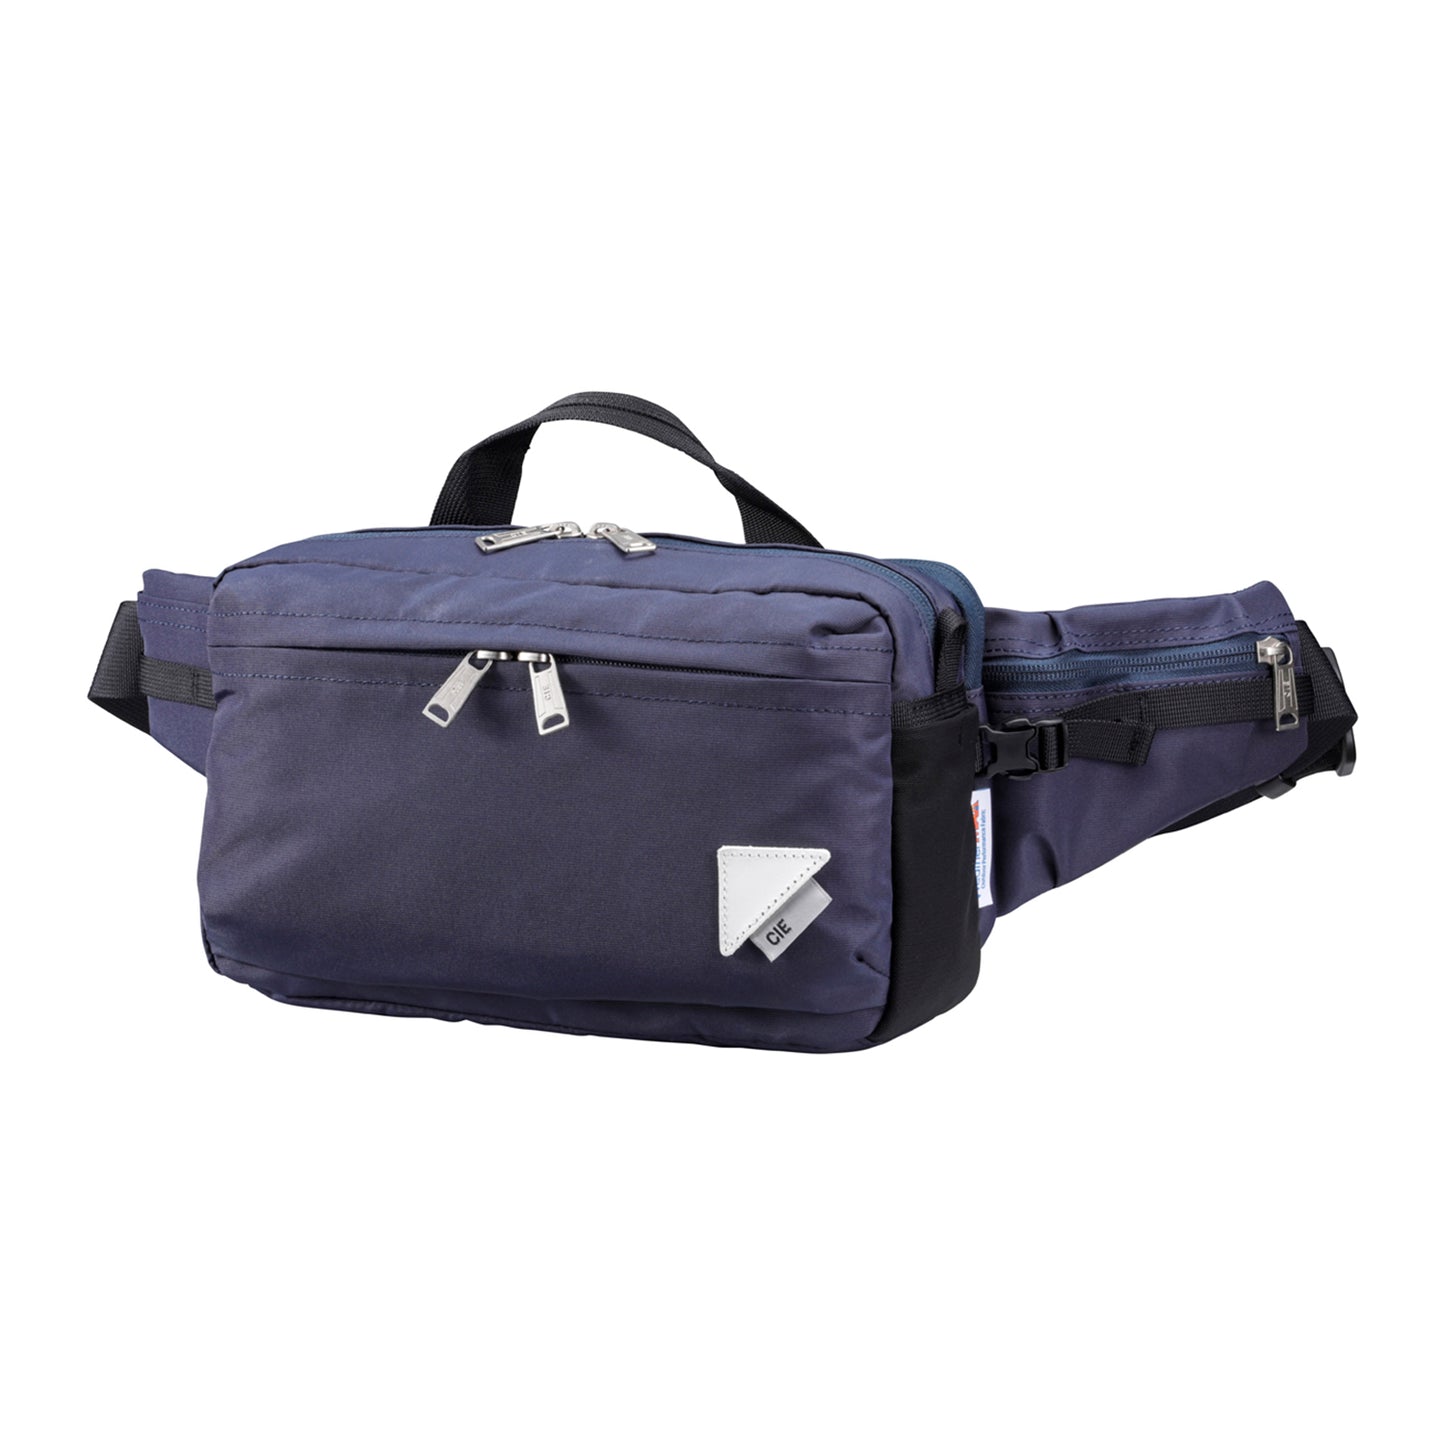 CIE WEATHER BODYBAG with MARKET BAG